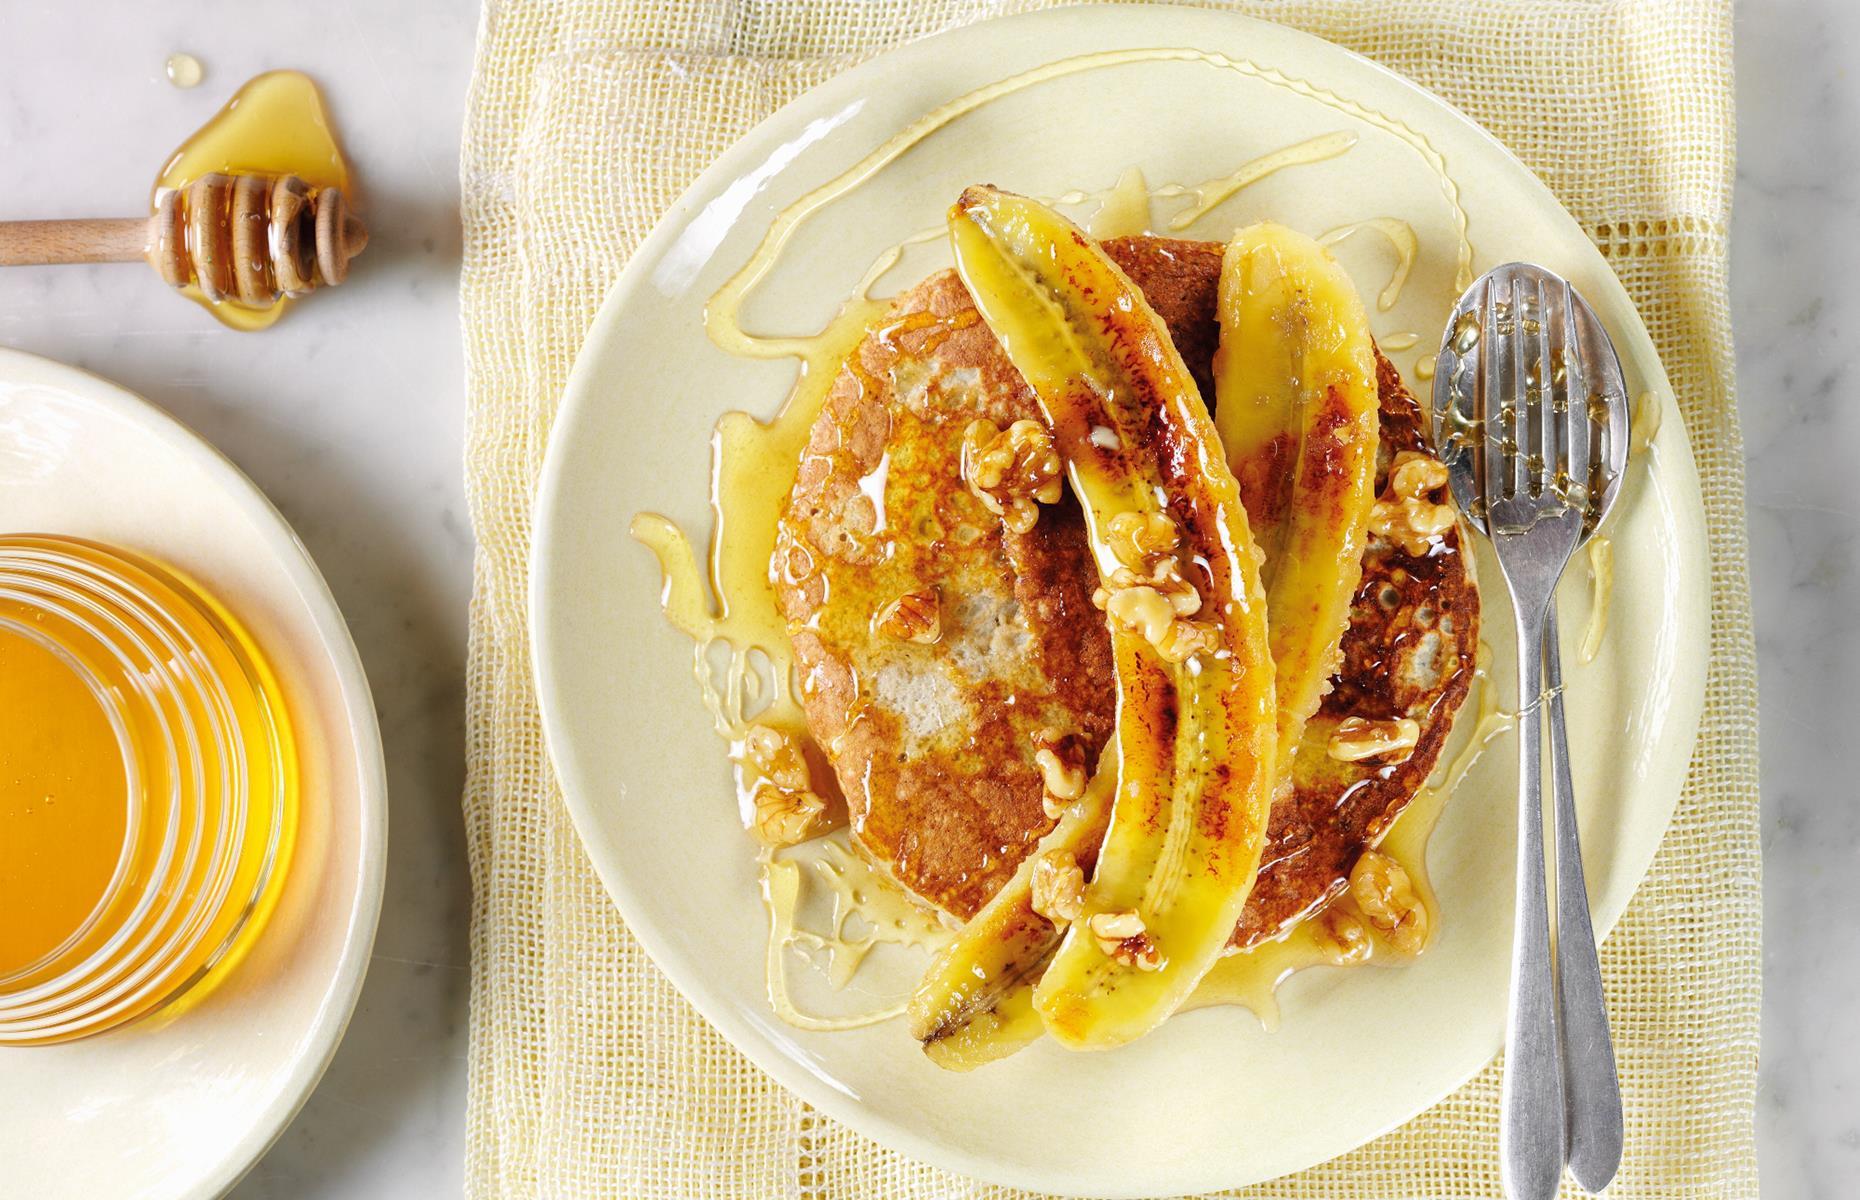 29 sweet and savoury pancake recipes that are anything but boring